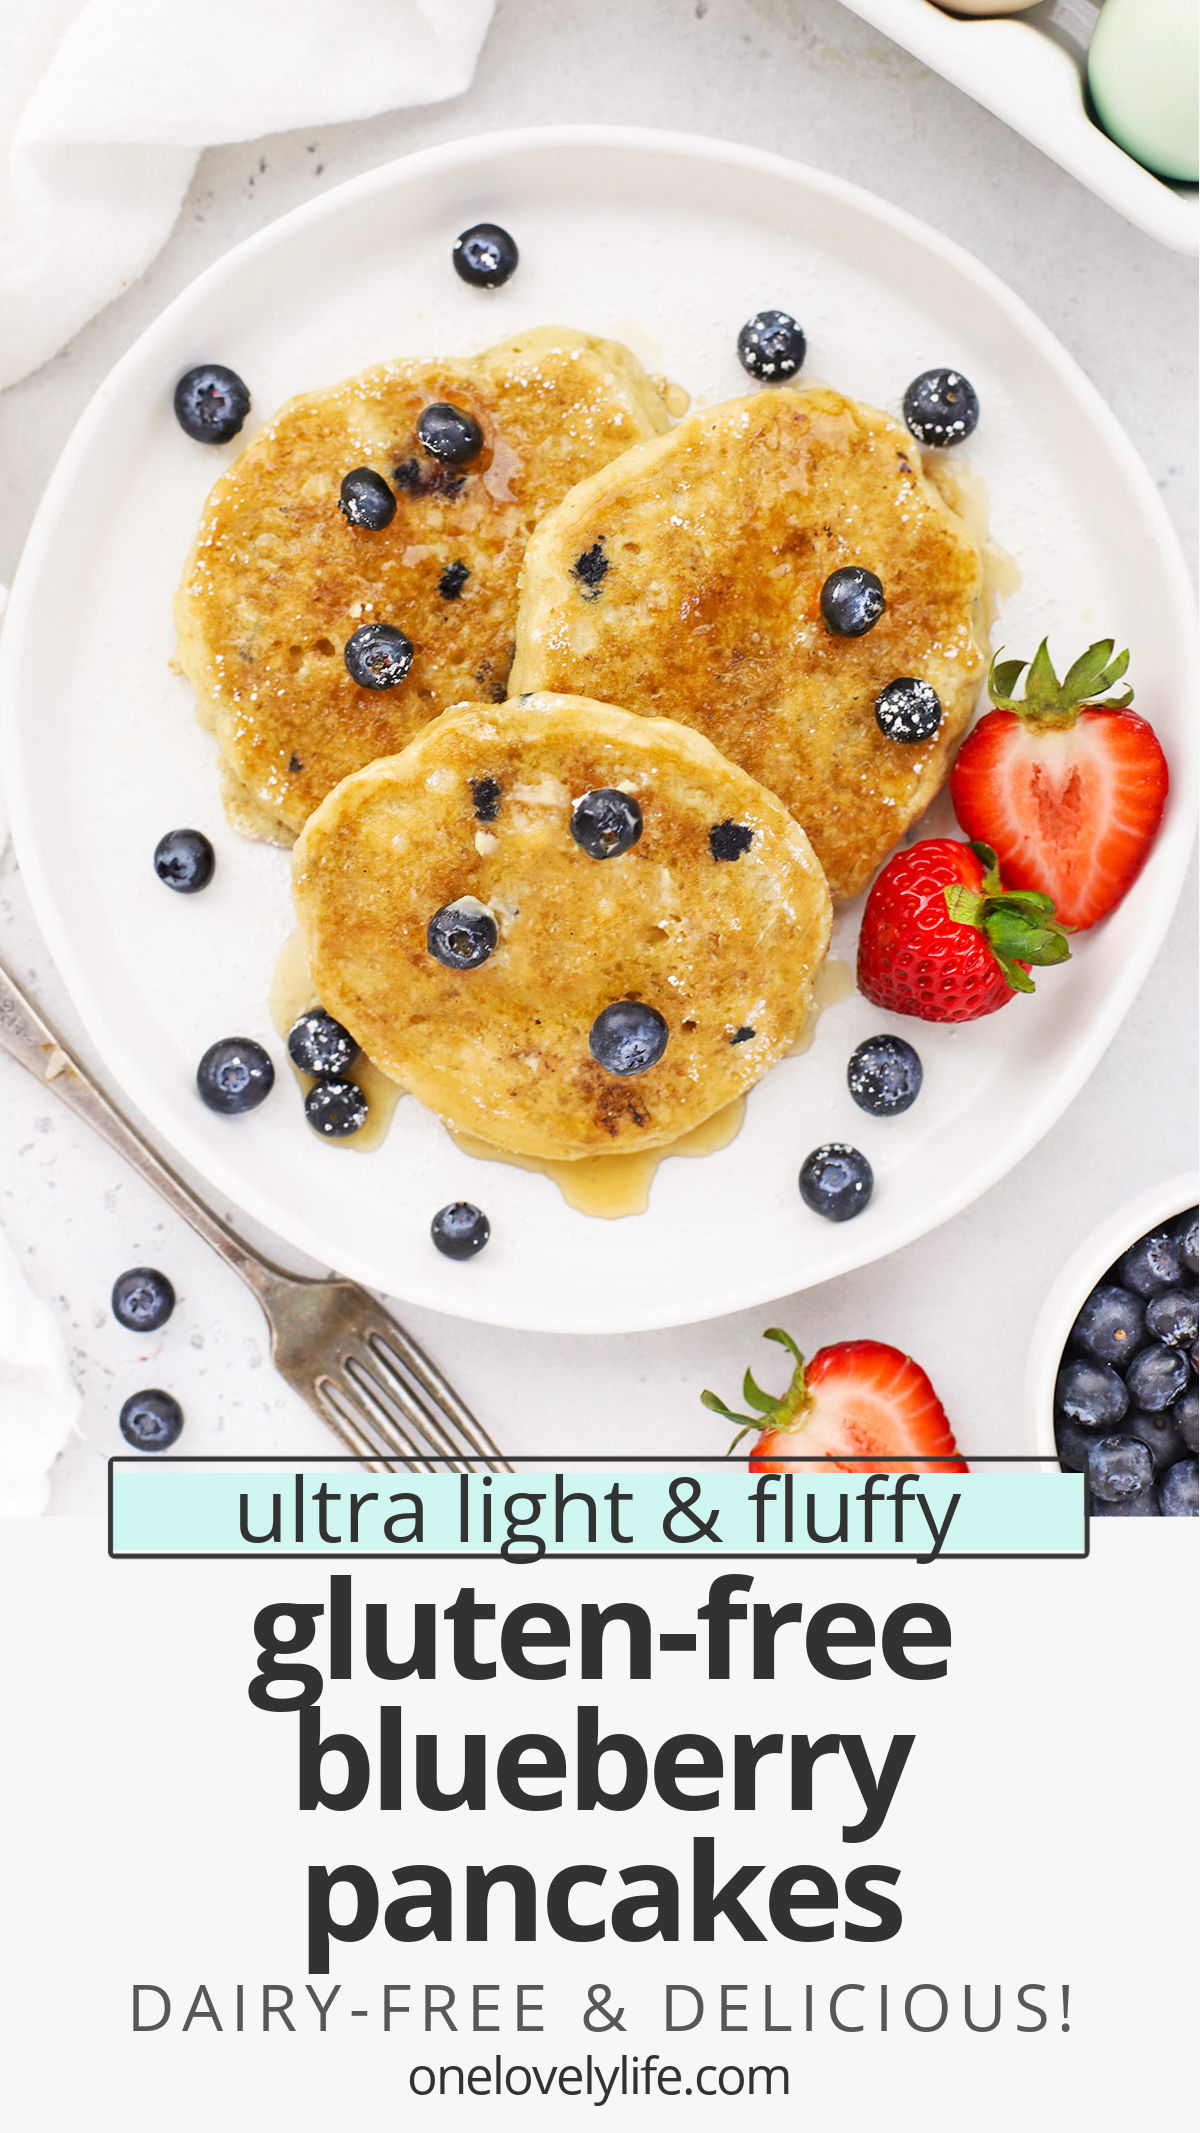 Fluffy Gluten-Free Blueberry Pancakes - These impossibly light, fluffy blueberry buttermilk pancakes are gluten-free, dairy-free & absolutely delicious. // gluten free blueberry pancakes recipe // dairy free blueberry pancakes // the best gluten-free blueberry pancakes // Gluten Free buttermilk blueberry pancakes #pancakes #blueberry #glutenfree #glutenfreepancakes